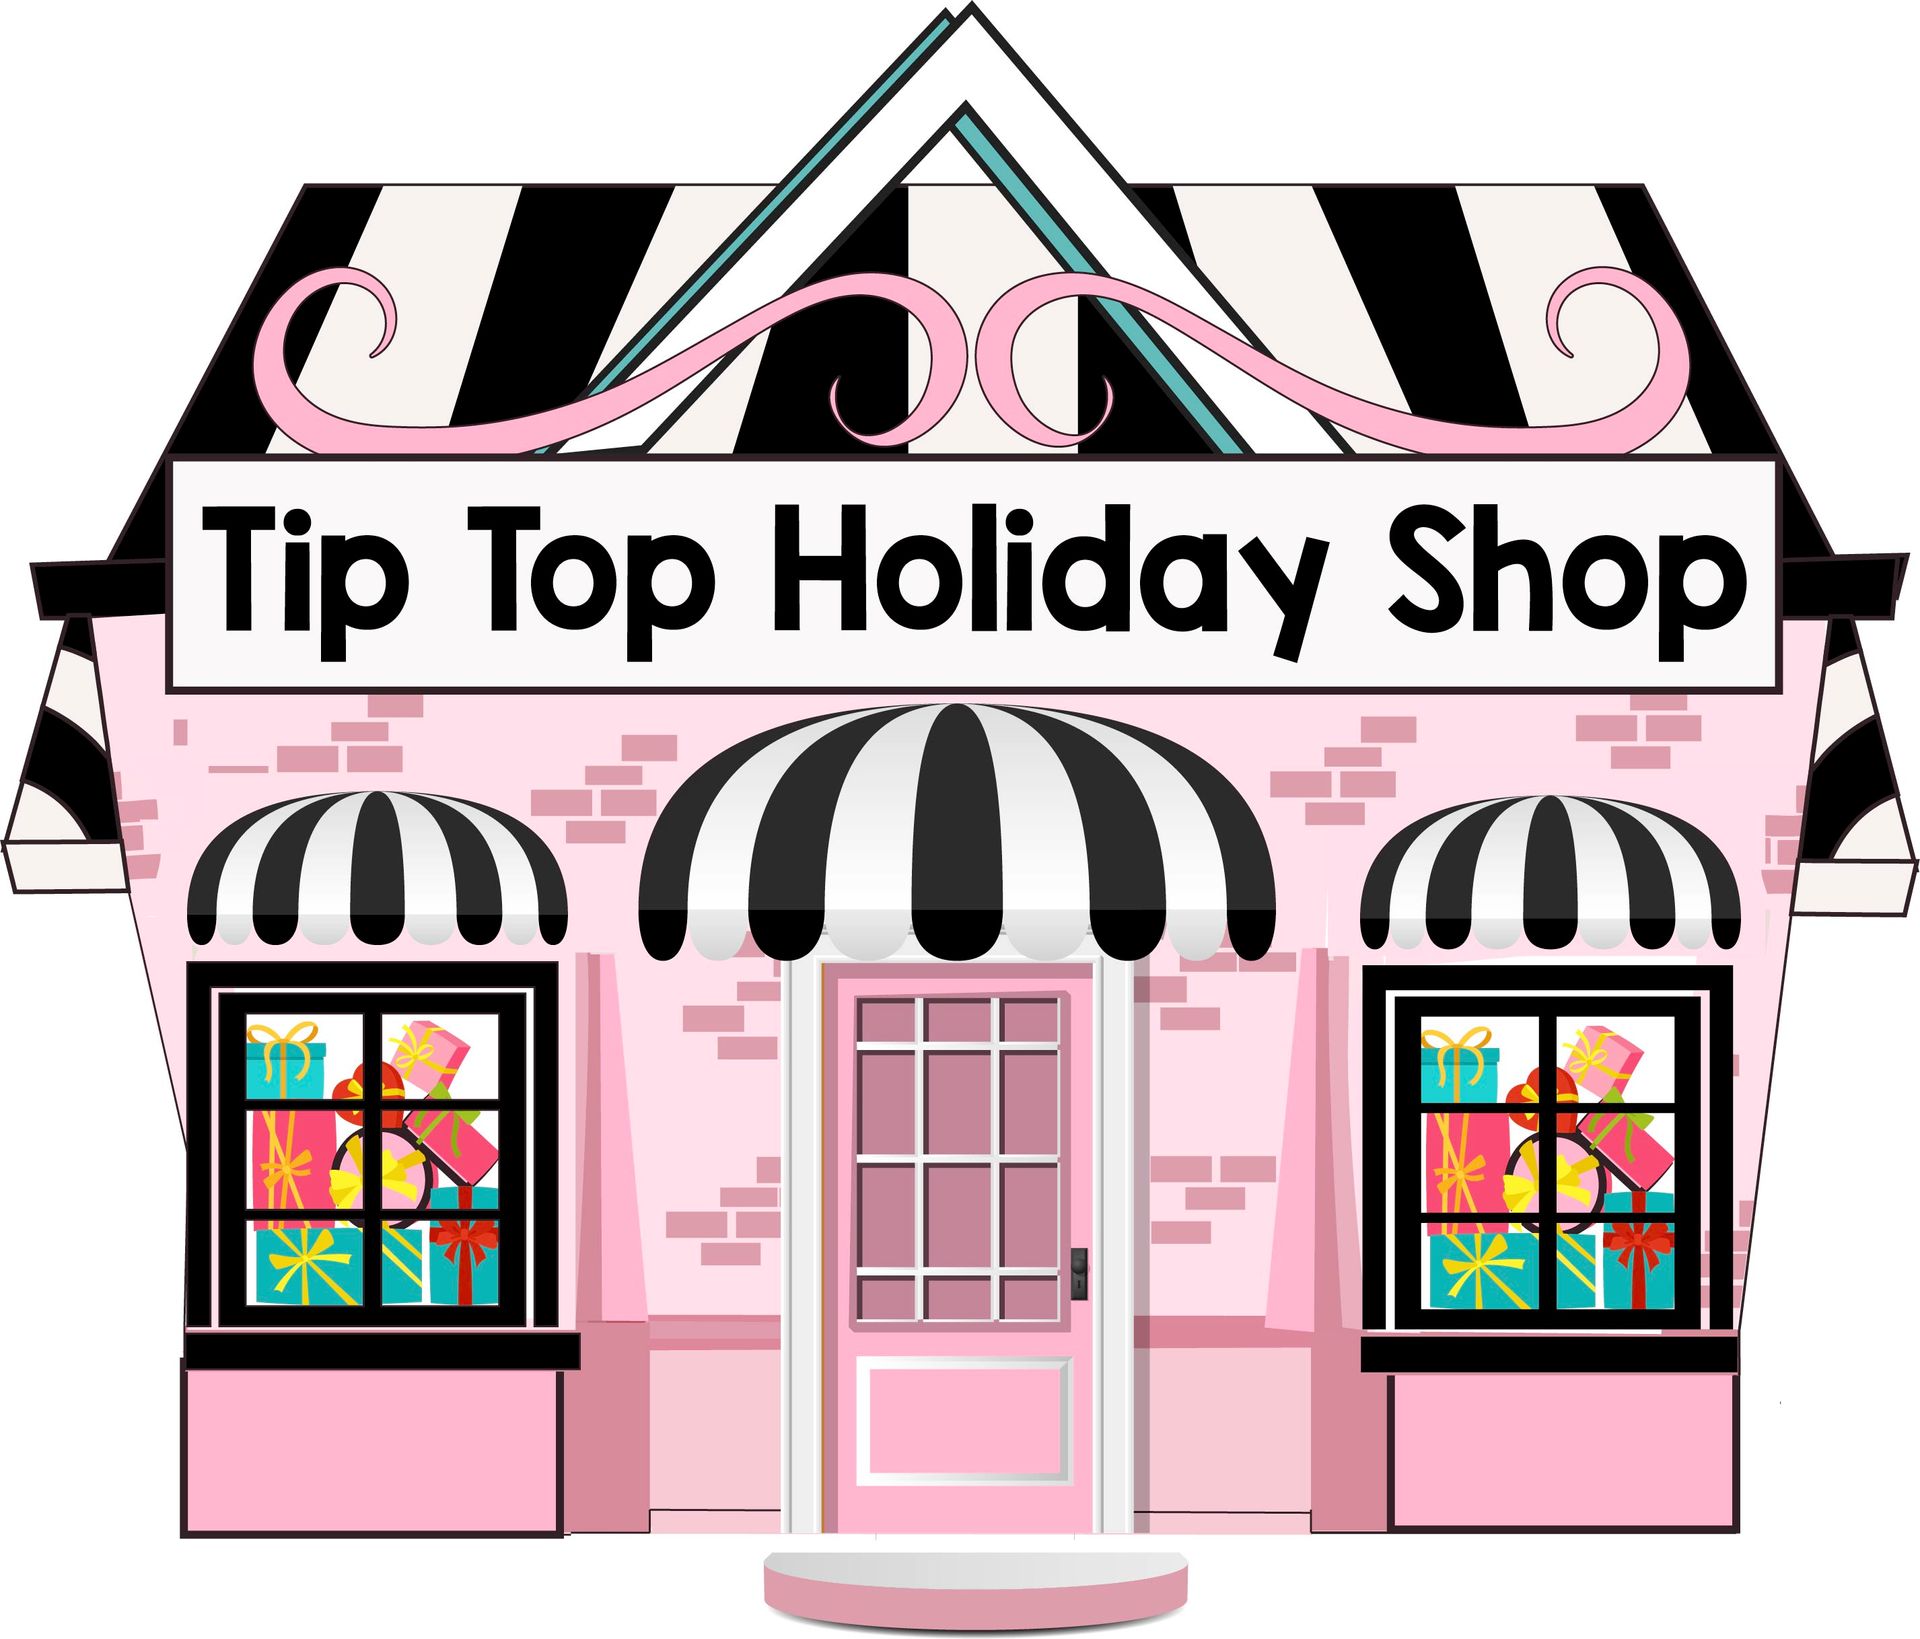 Tip Top Holiday Shop, Gift Items